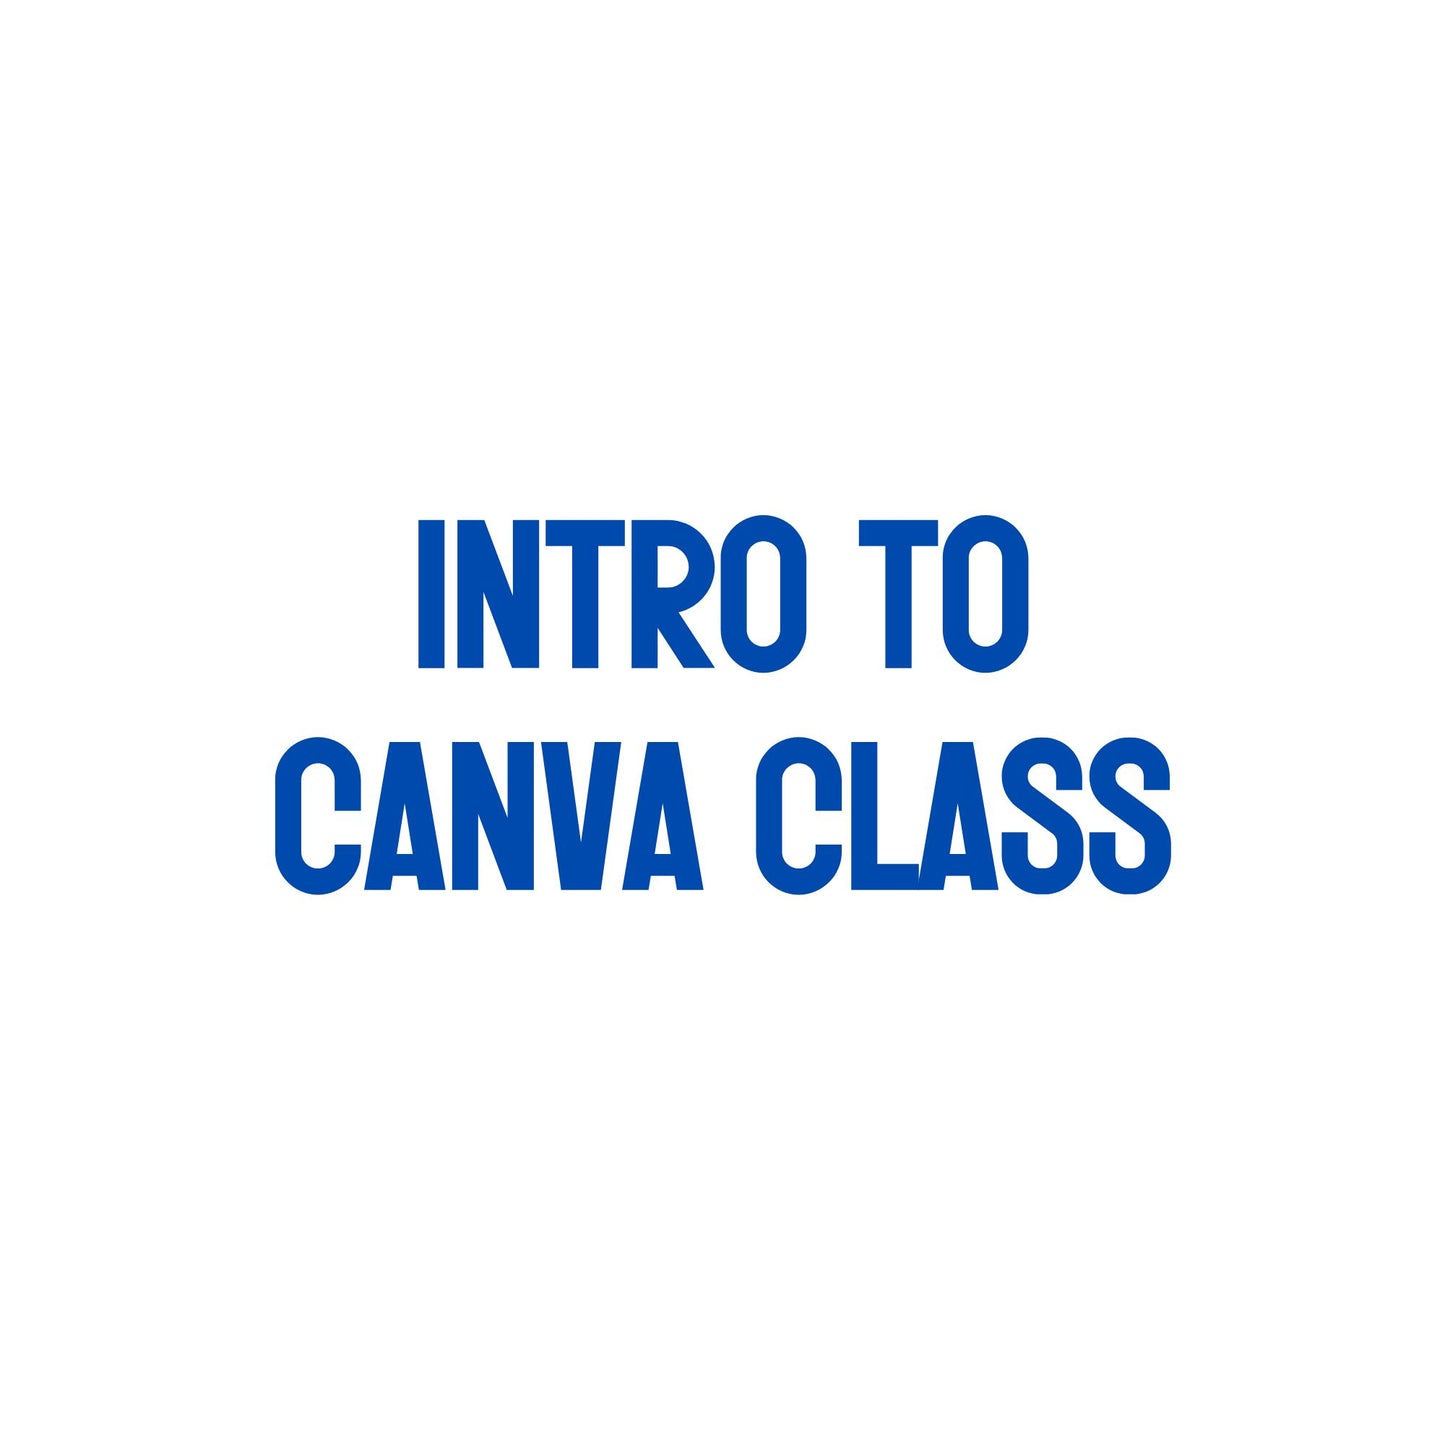 Intro to Canva Class